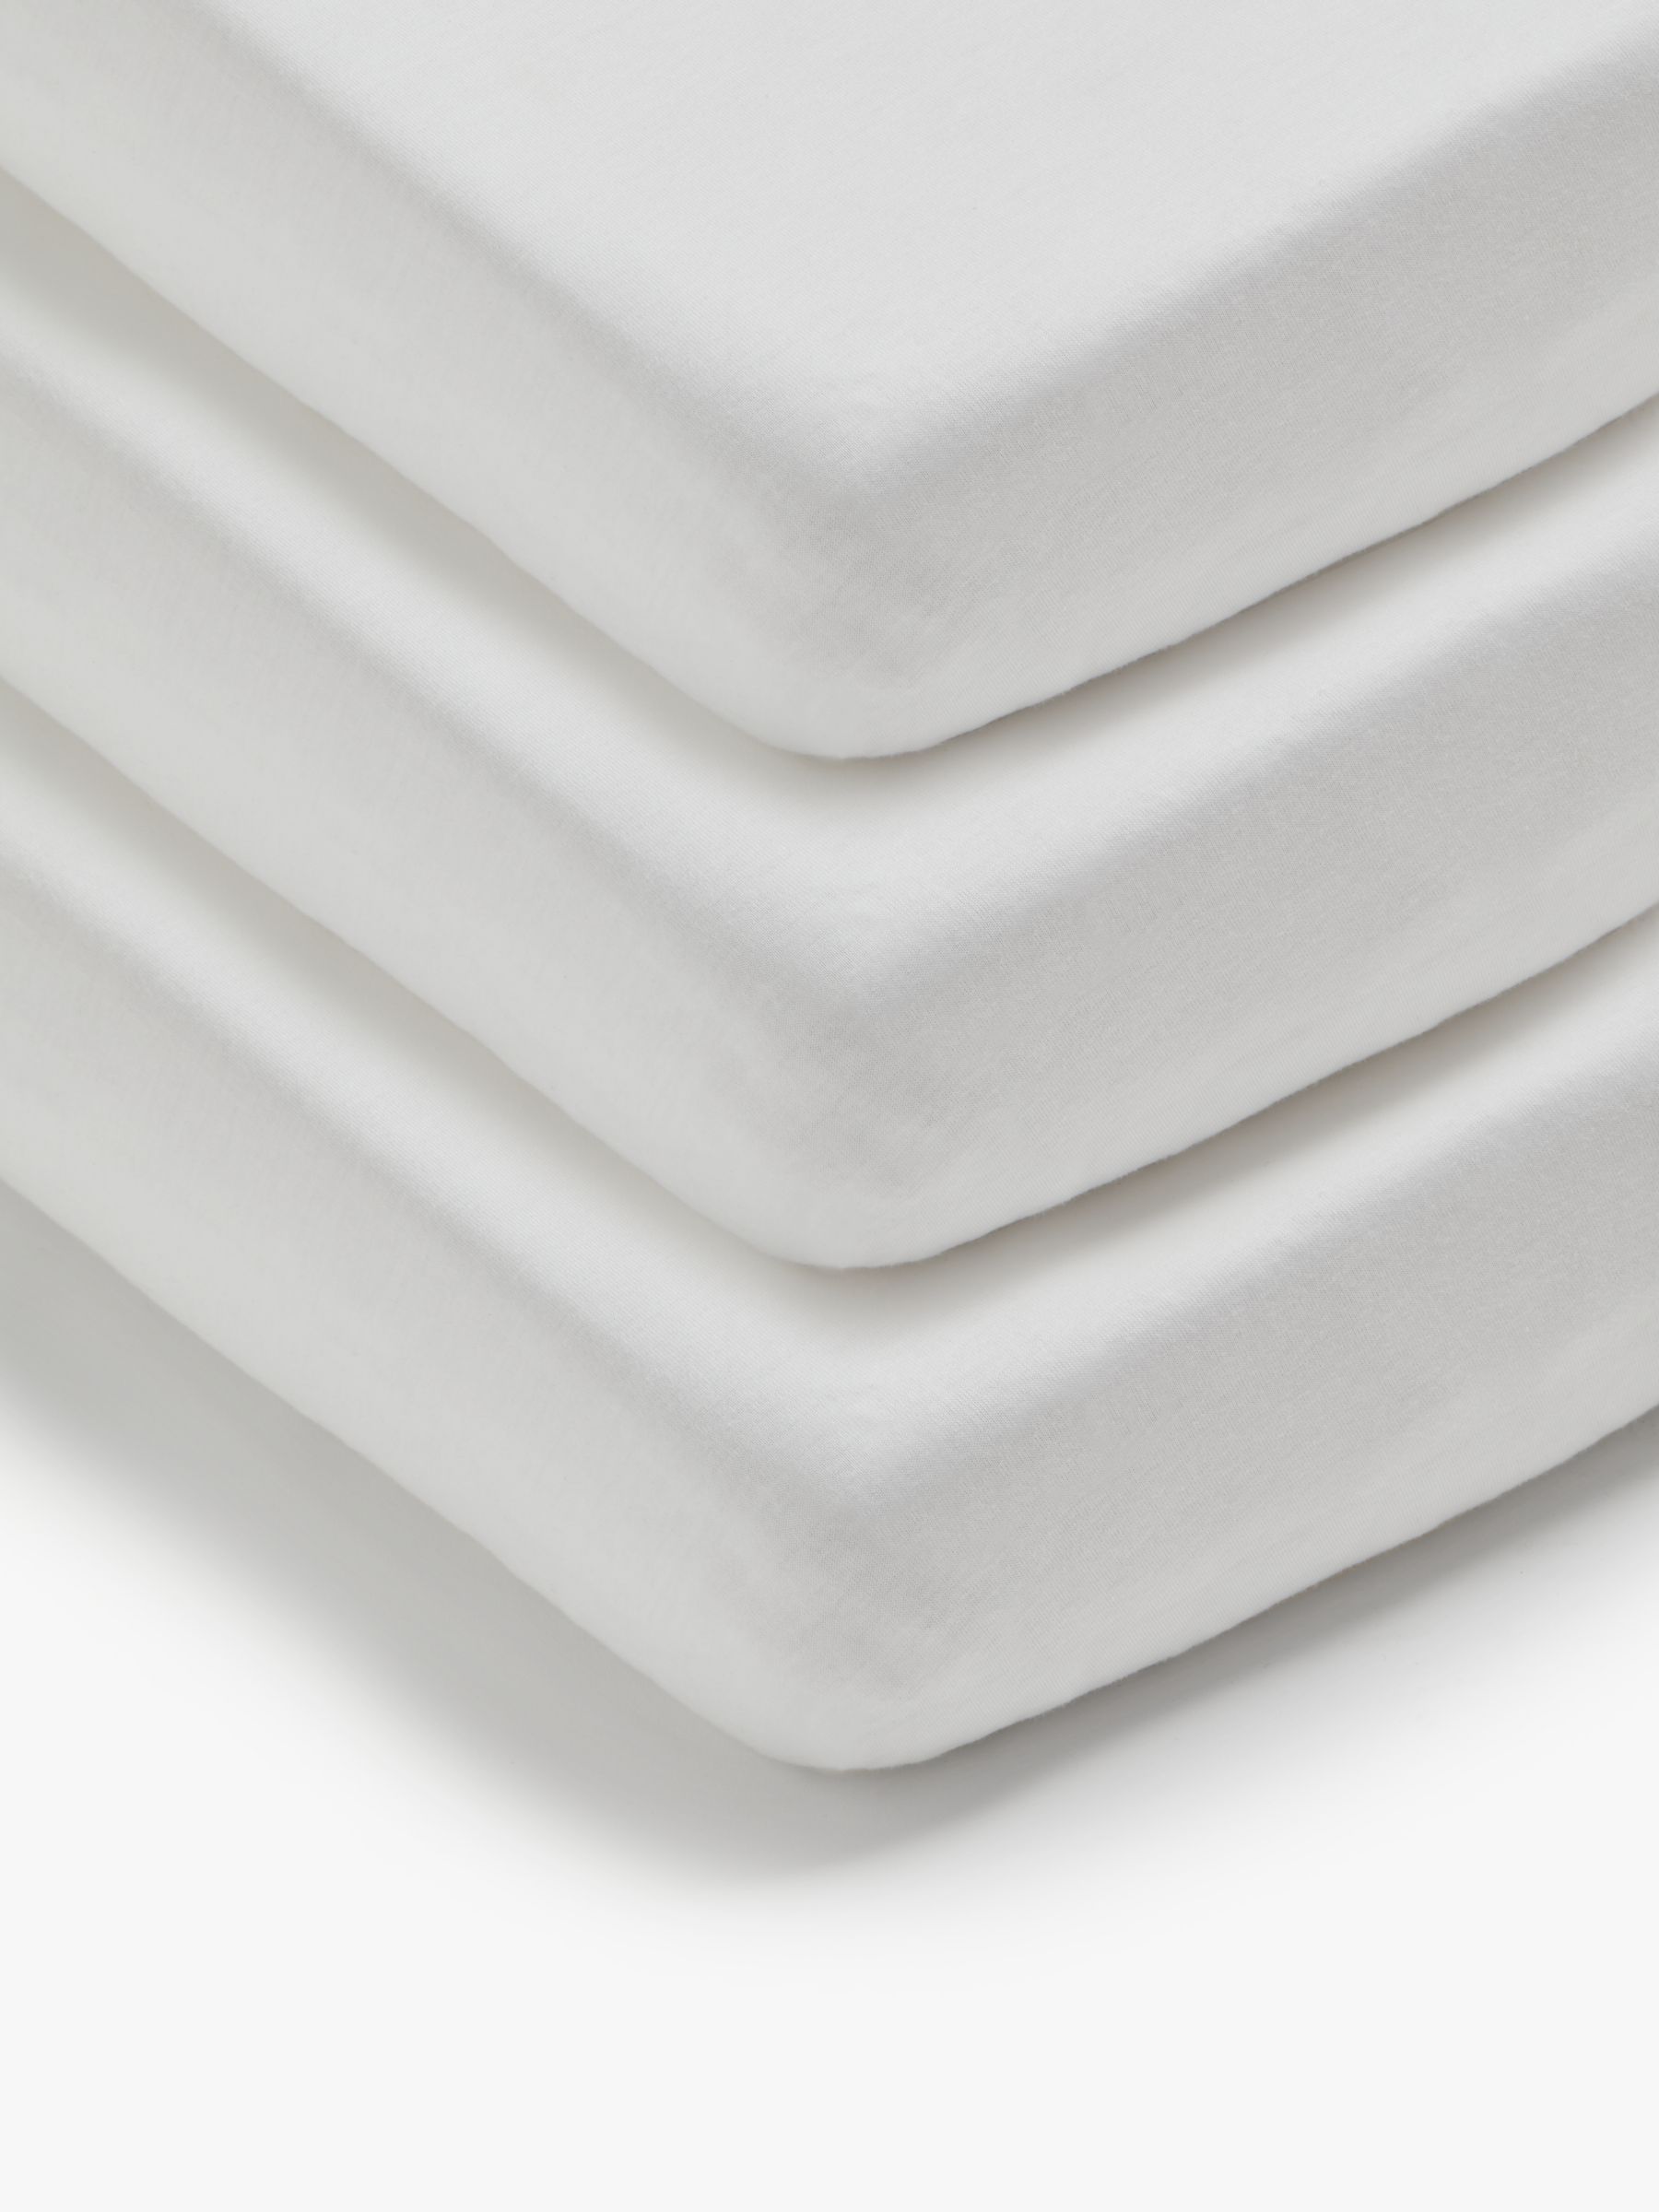 John Lewis ANYDAY Cotton Fitted Cot Sheet, Pack of 3, 60 x 120cm, White